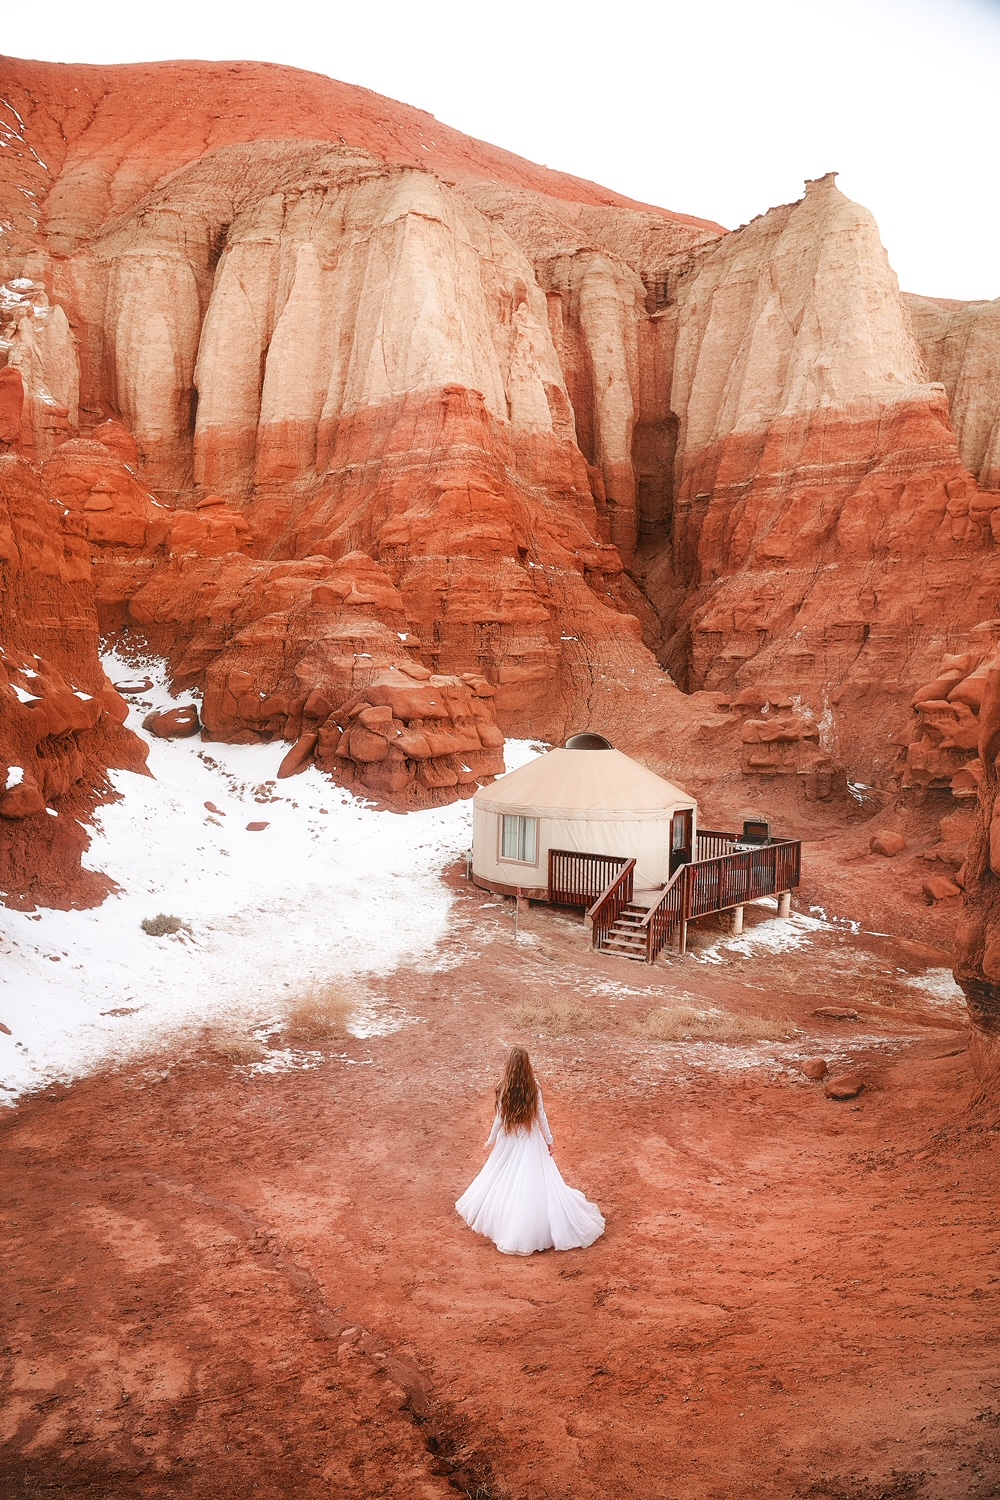 Woman with long hair and long white dress standing near a yurt and snow under striped rock cliff in Goblin Valley State Park.